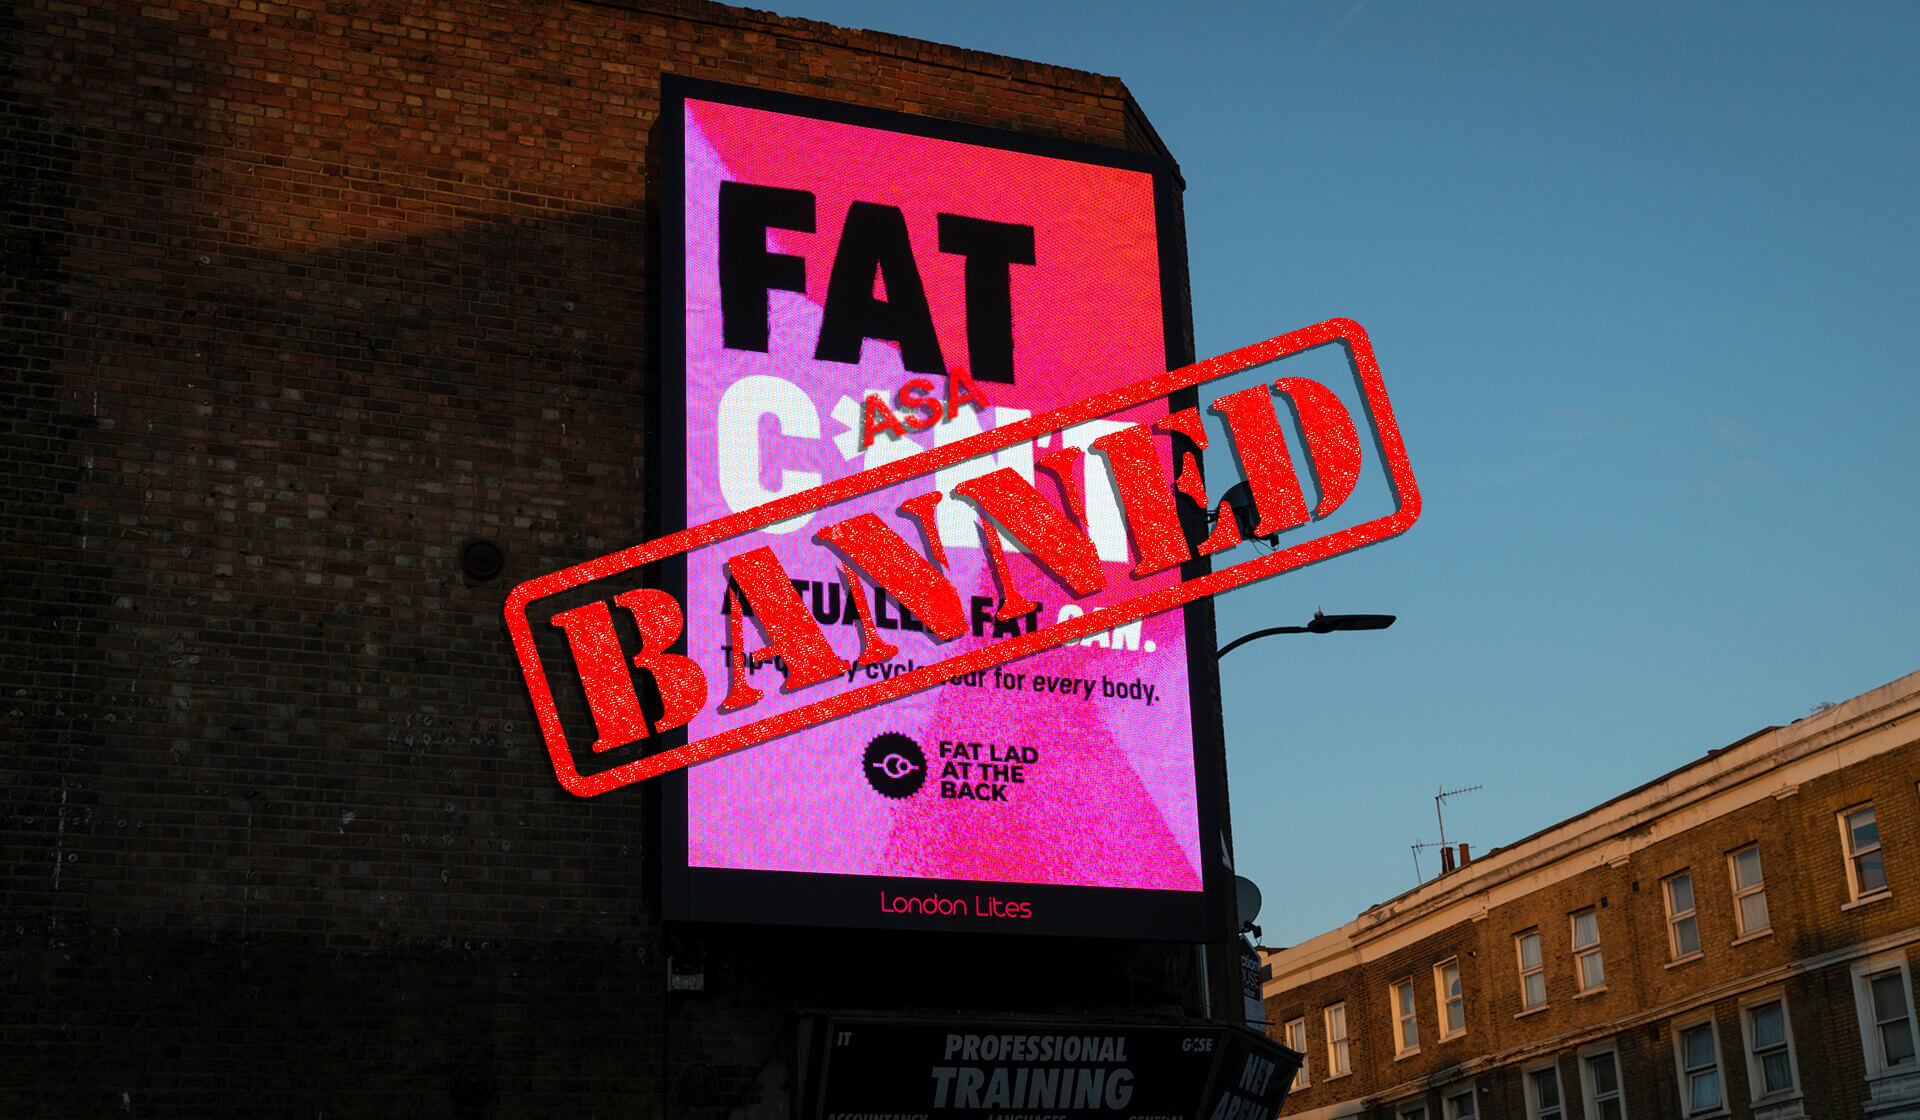 Fat Lad at the Back - Fat C*n't - Mellor&Smith - Ad campaign - Outdoor OOH - Paul Mellor